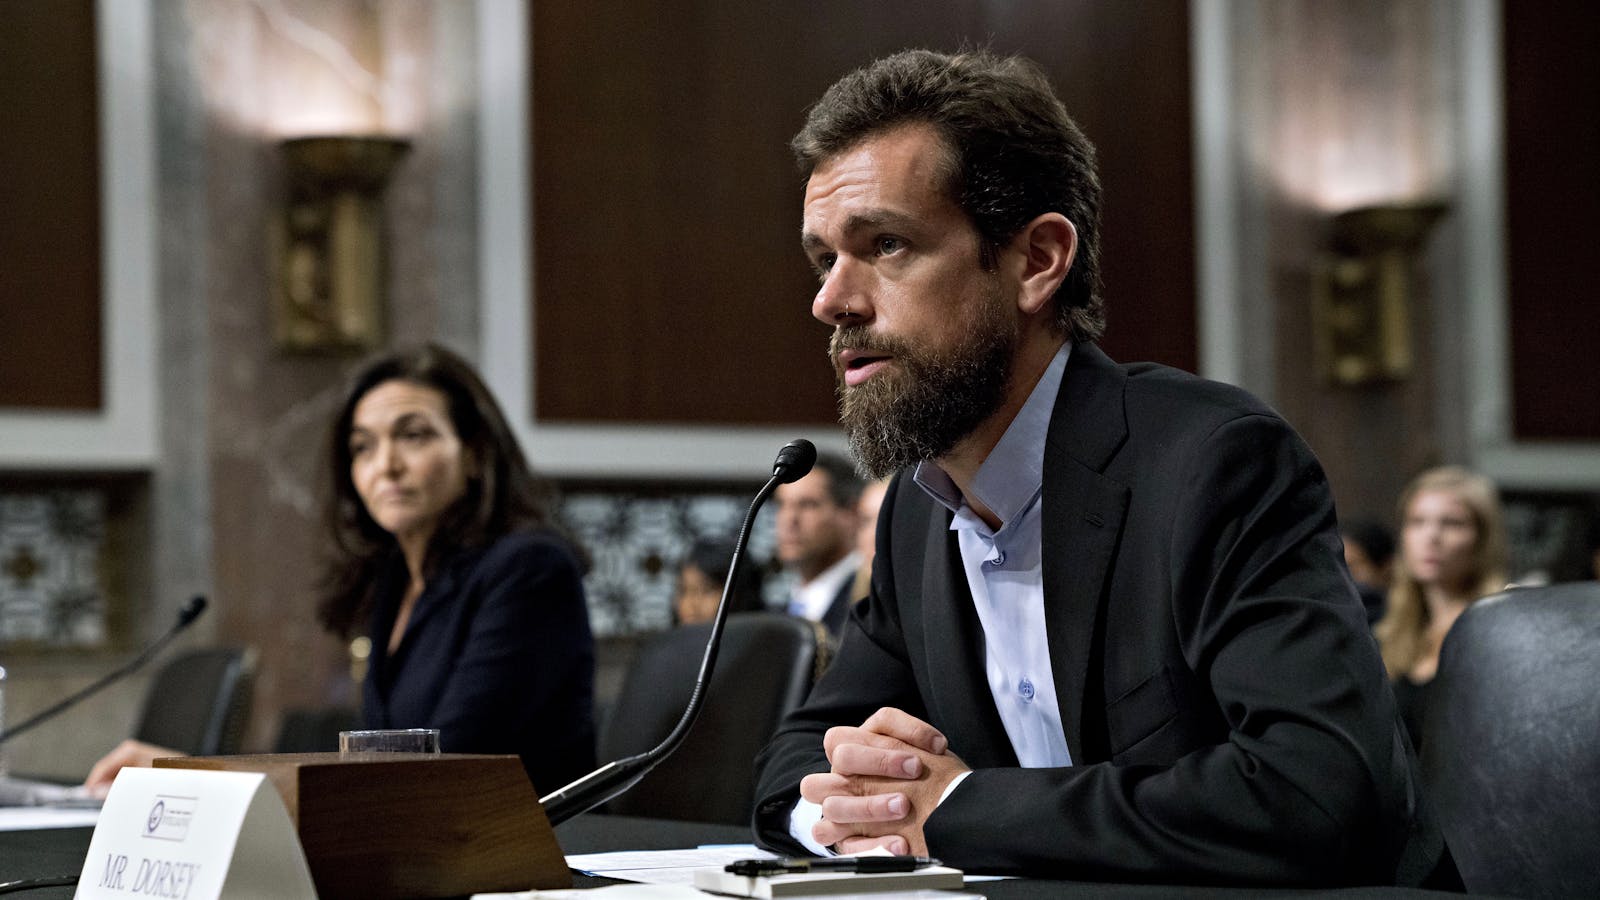 Facebook COO Sheryl Sandberg and Twitter CEO Jack Dorsey on Capitol Hill on Wednesday. Photo by Bloomberg